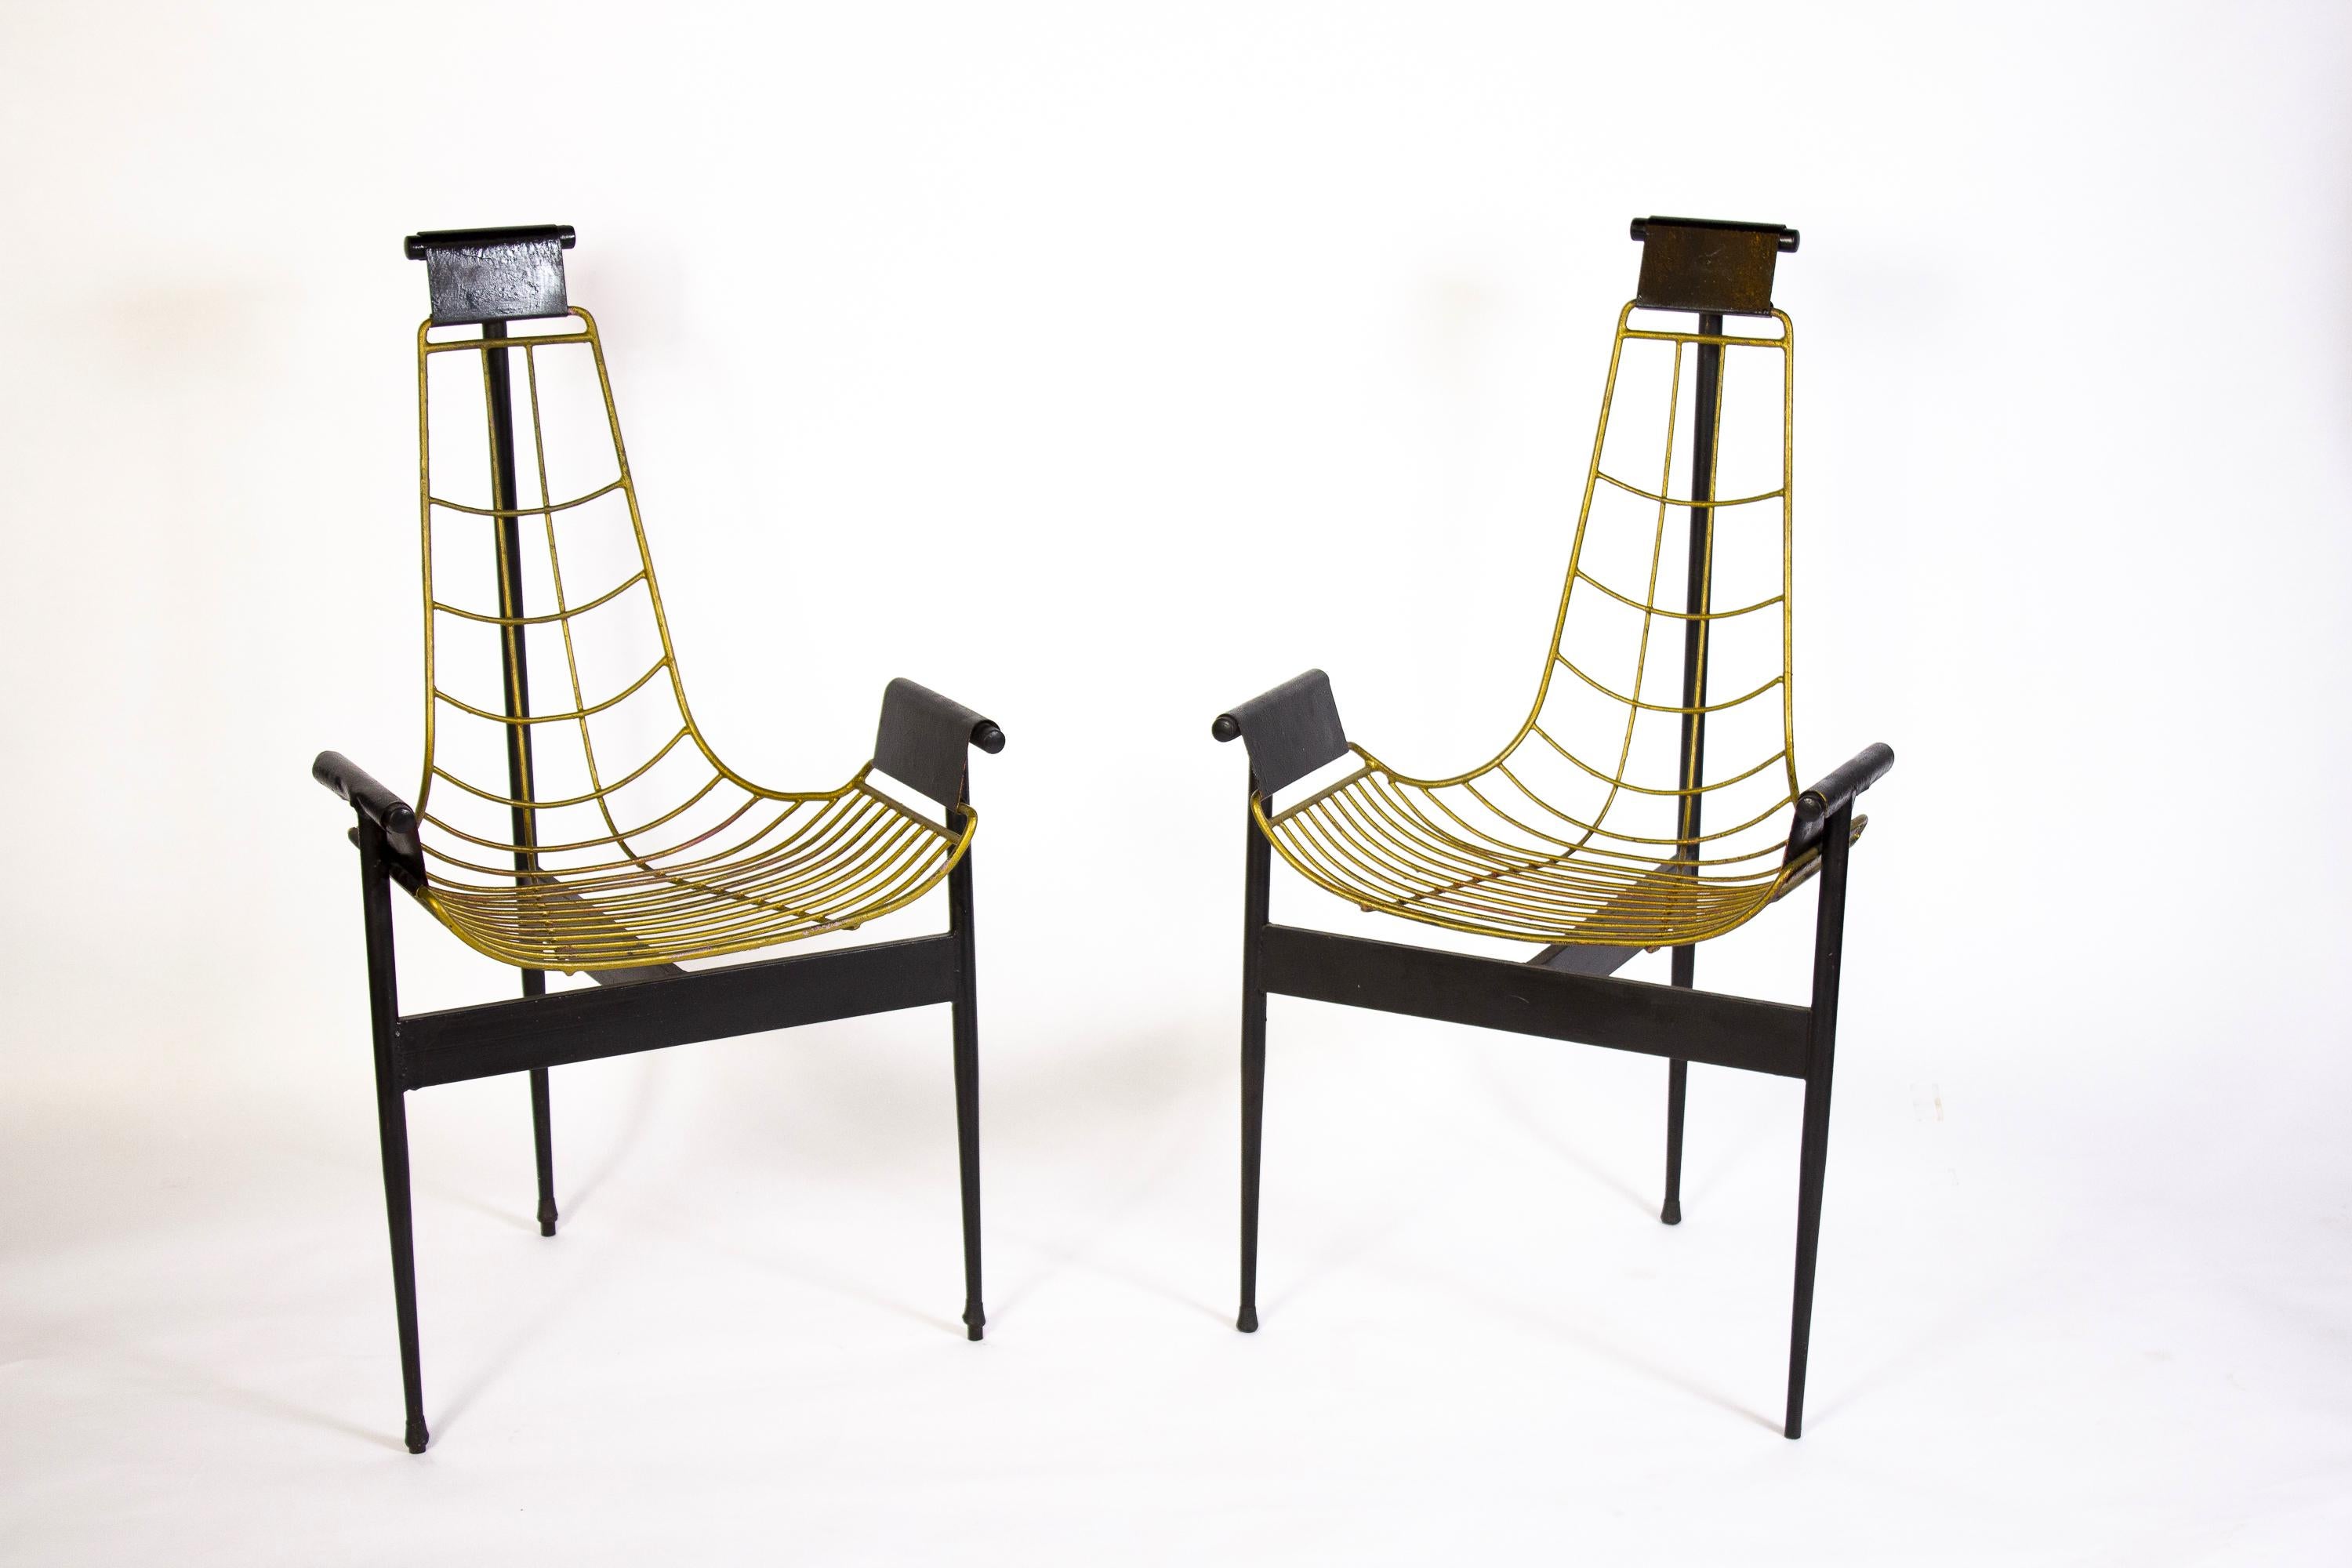 William Katavolos in partnership with Douglas Kelley & Ross Littell designed the iconic sling-back T chair in 1952 as model 3LC in Laverne International's sculptural New Furniture series.
Frame of Black lacquered tubular steel and gold painted flat